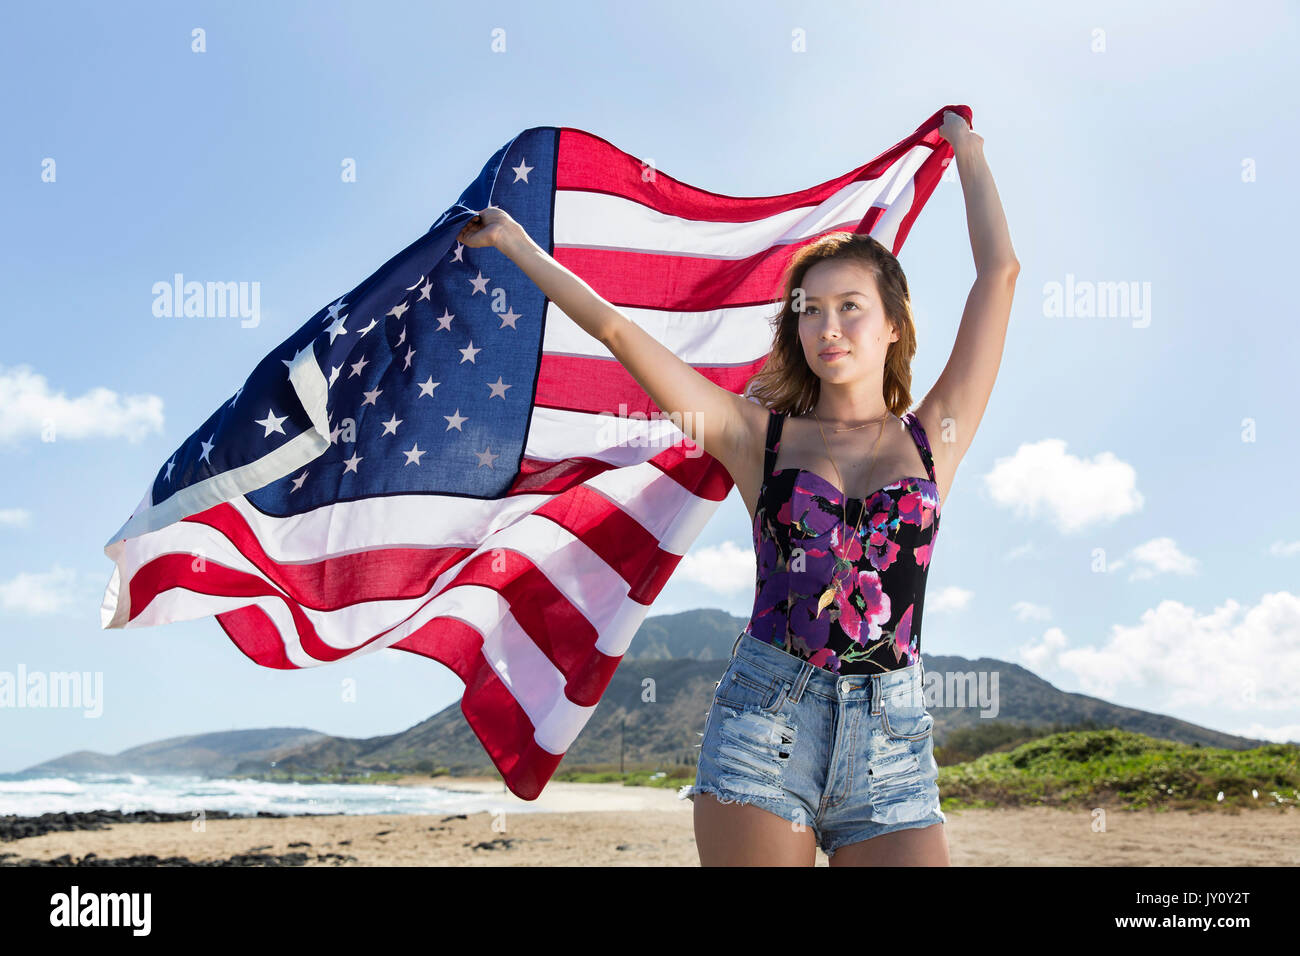 Mixed Race woman holding American flag on beach Stock Photo